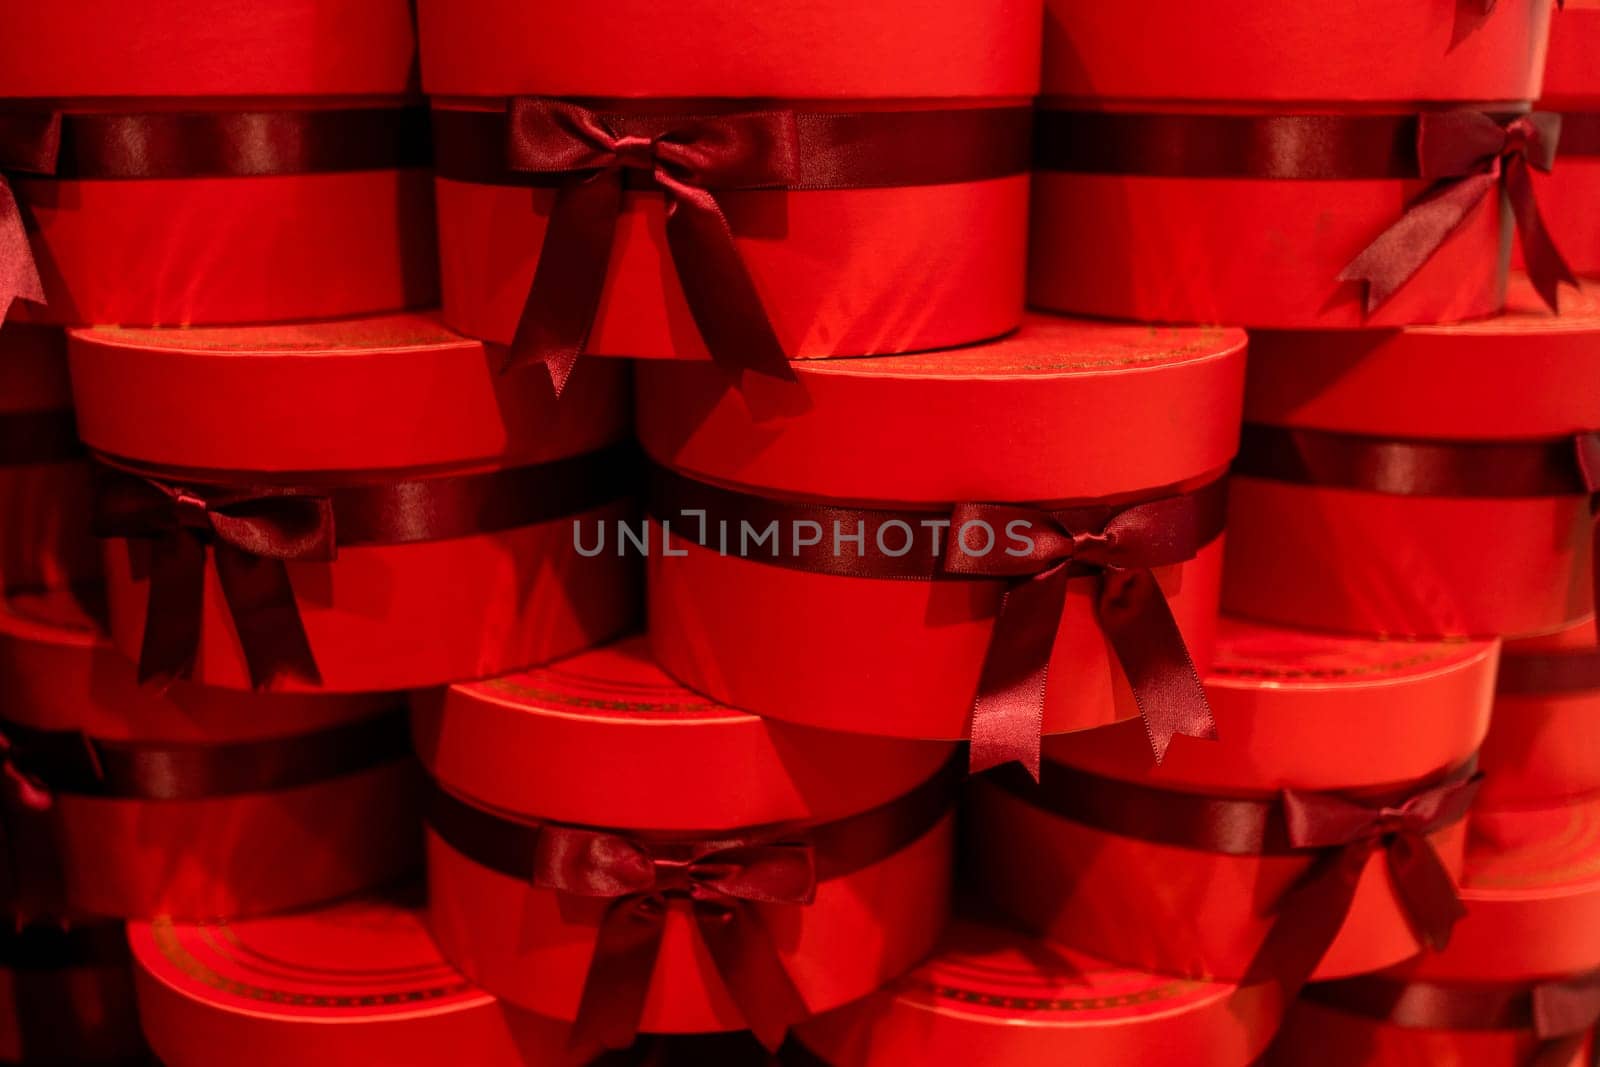 Closeup of gift boxes tied with ribbons, illuminated with warm red light. Stack of presents displayed for sale at retail store, conveying festive and inviting atmosphere.